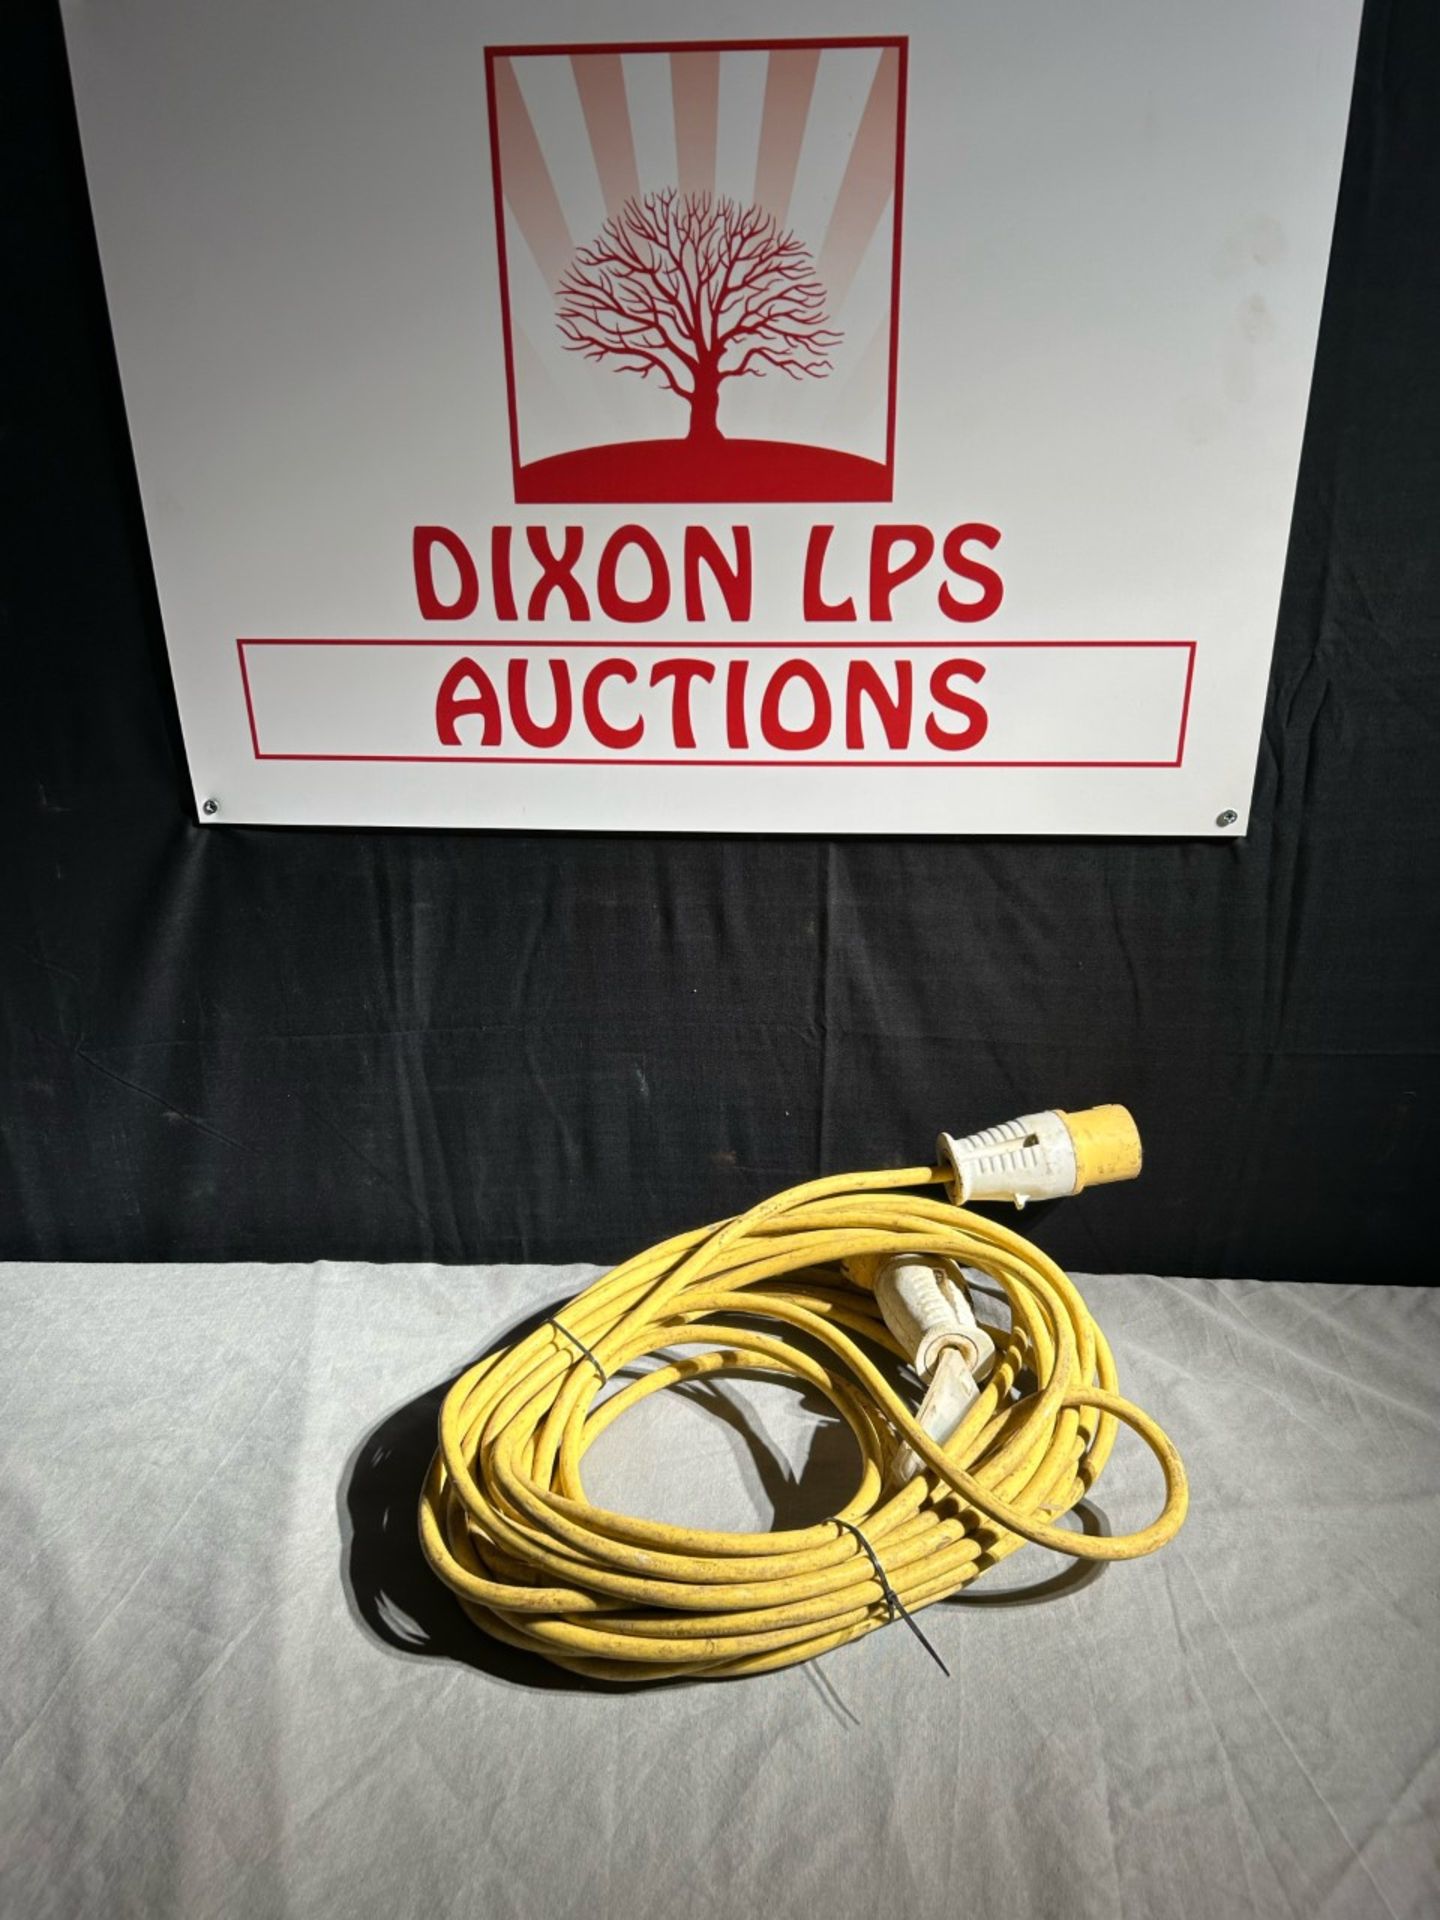 110v 10m extension lead. Good condition